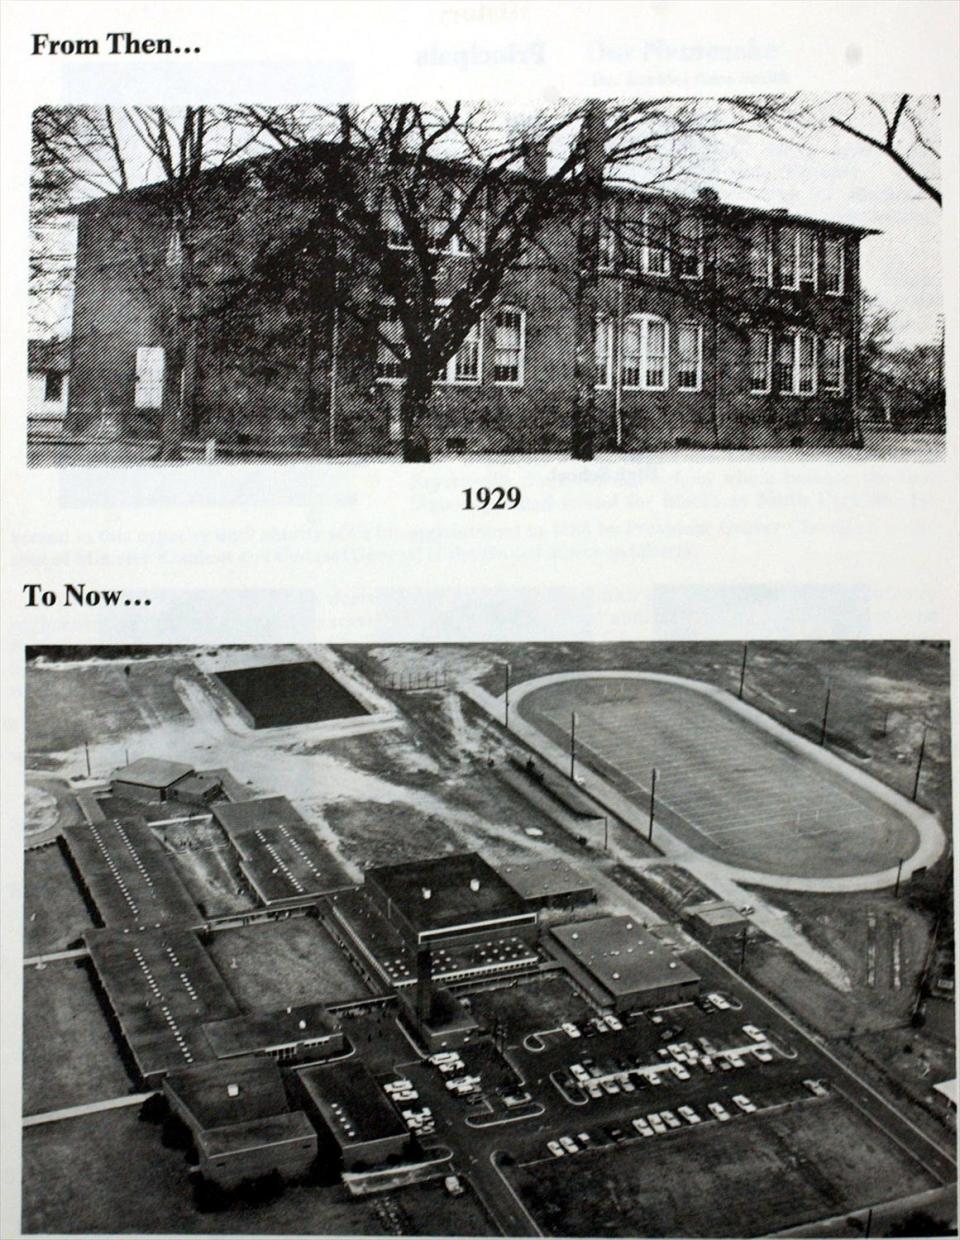 This a copy photograph of Orange Street school in 1929 on the top, and a photograph of the then new E.E. Smith High School in a photograph out of a program from 1977. 